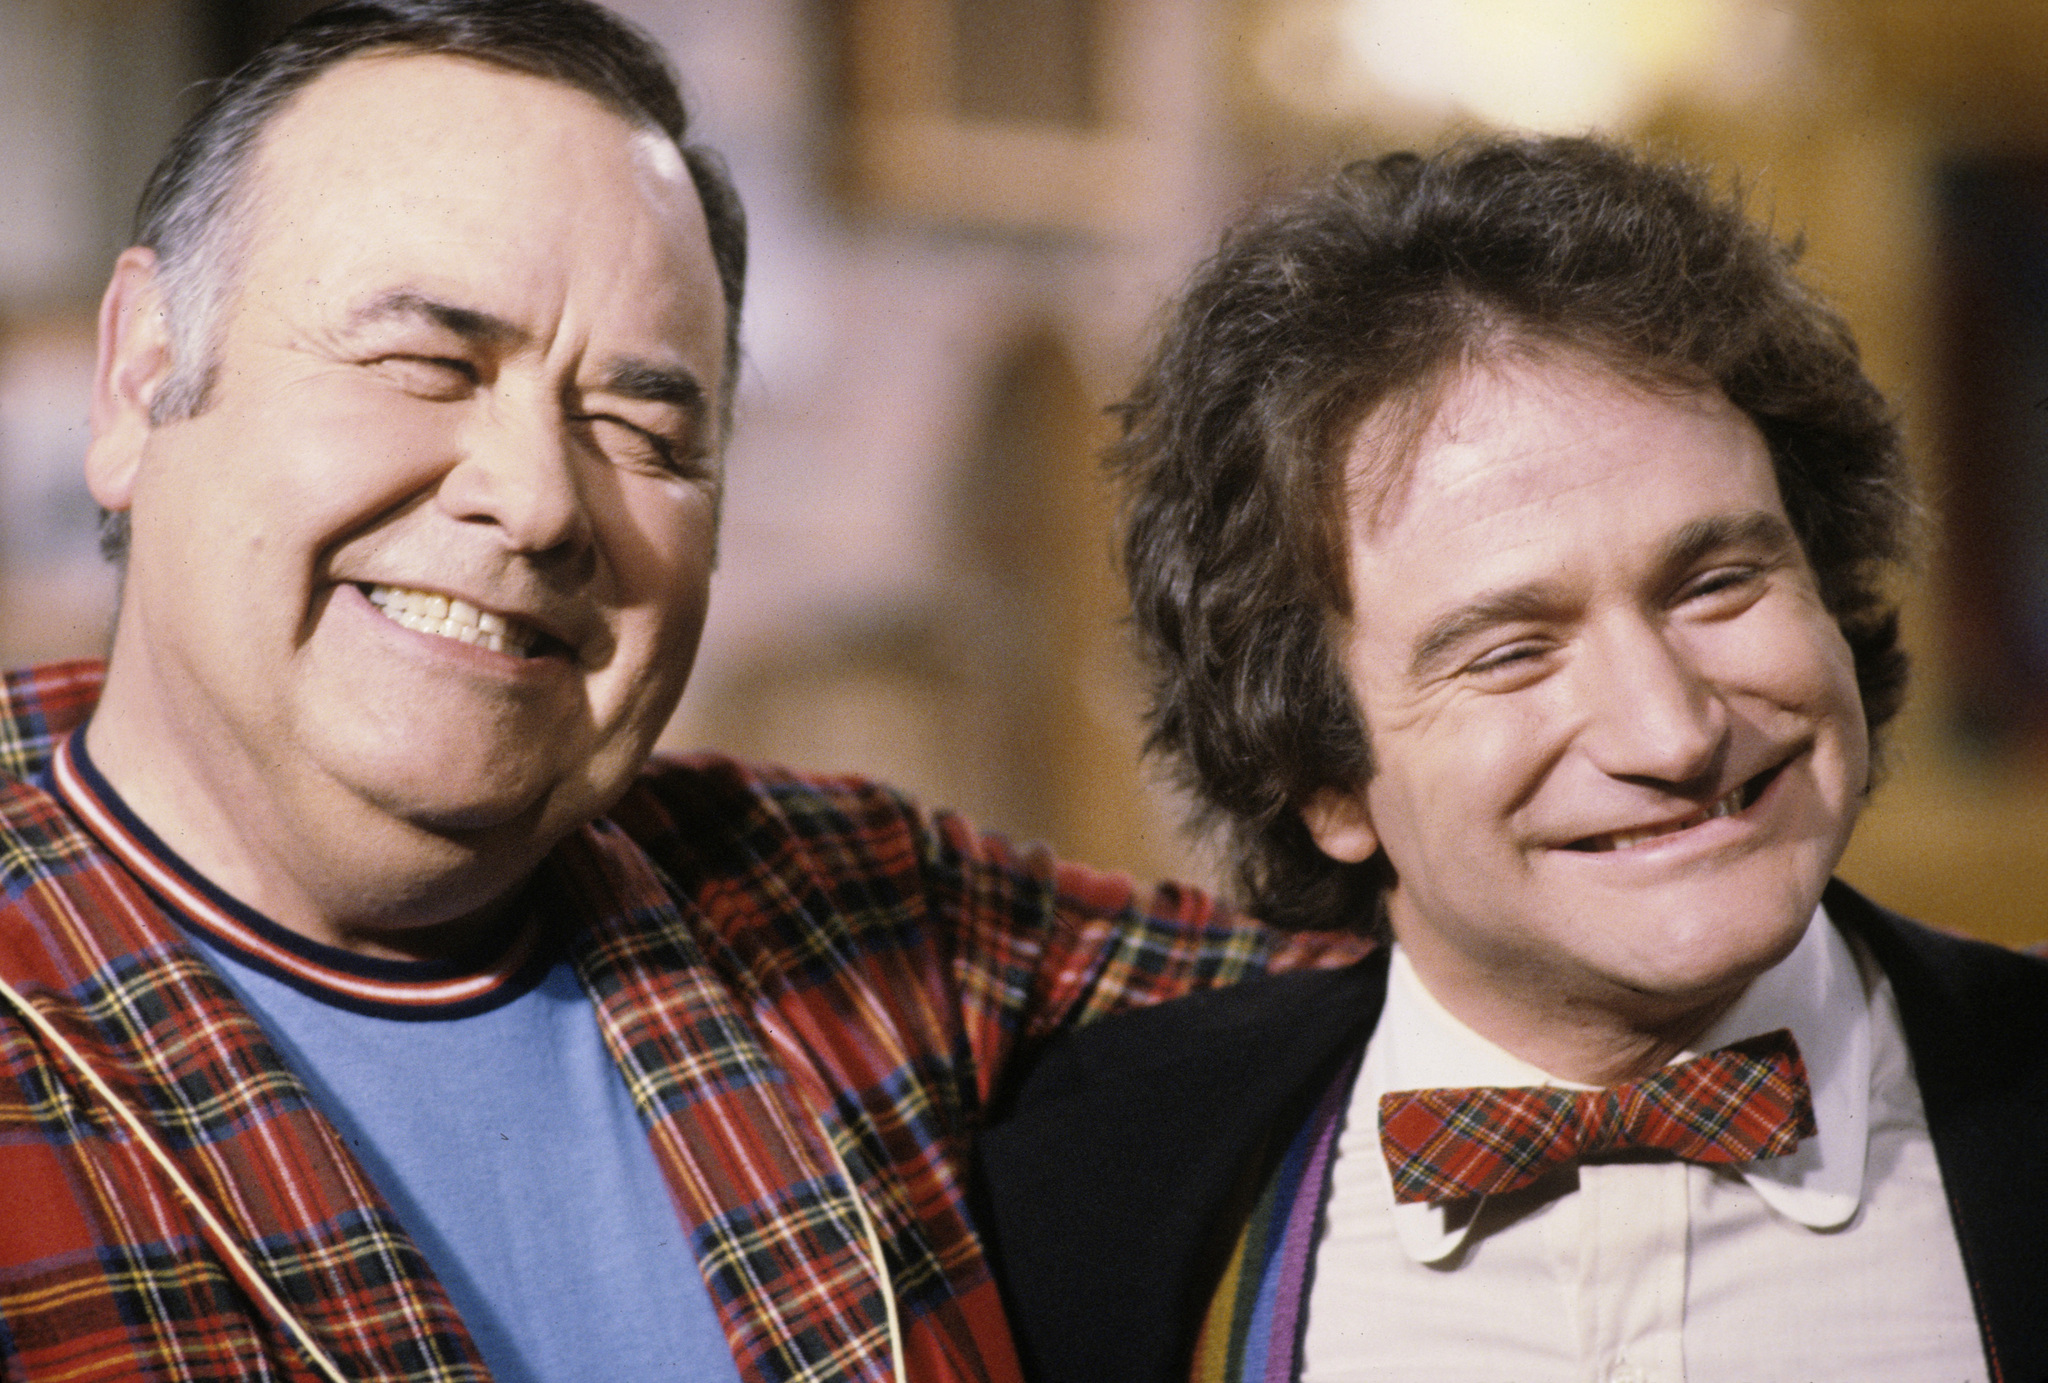 Robin Williams and Jonathan Winters at event of Mork & Mindy (1978)